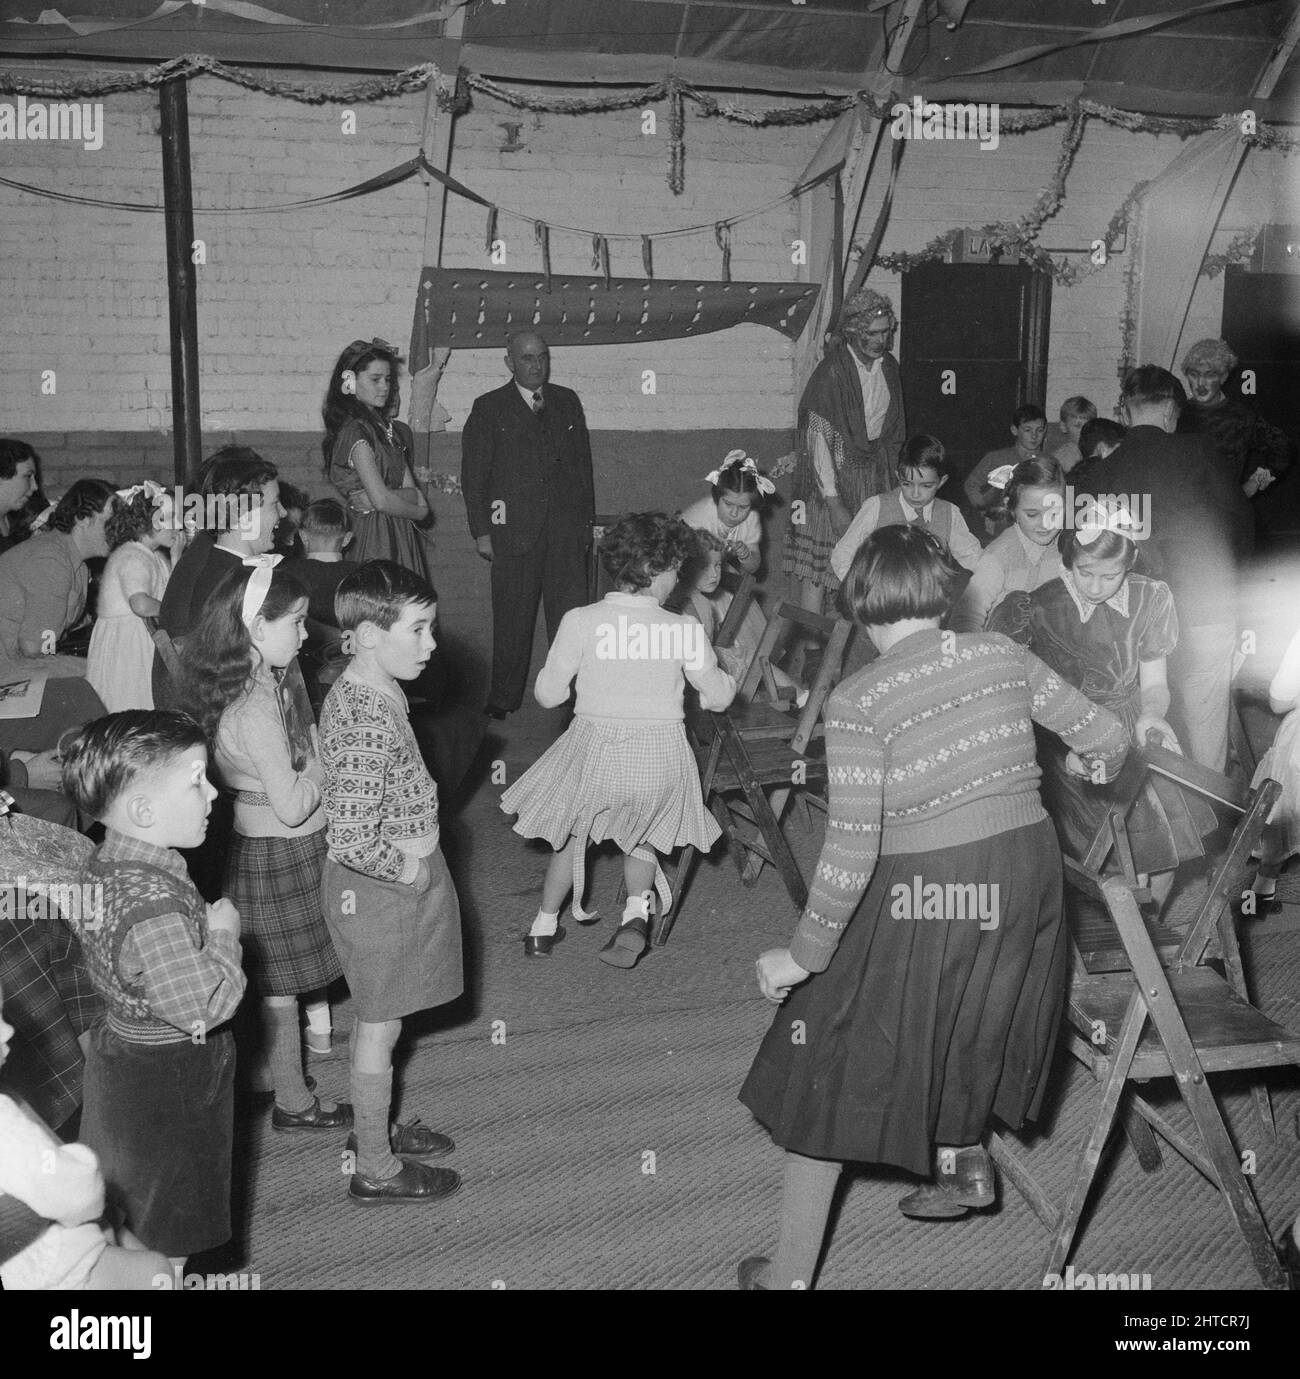 Thurleigh Airfield, Thurleigh, Bedfordfordshire, 19/12/1953. A game of musical chairs being played at a children's party. This photograph shows a children's party that was organised by Laing's Welfare staff and members of the Committee for the children of staff working on the Thurleigh Airfield project. The party was held in the Camp Theatre and included clowns, games, a film show, presents from Santa Claus and tea for sixty children. Stock Photo